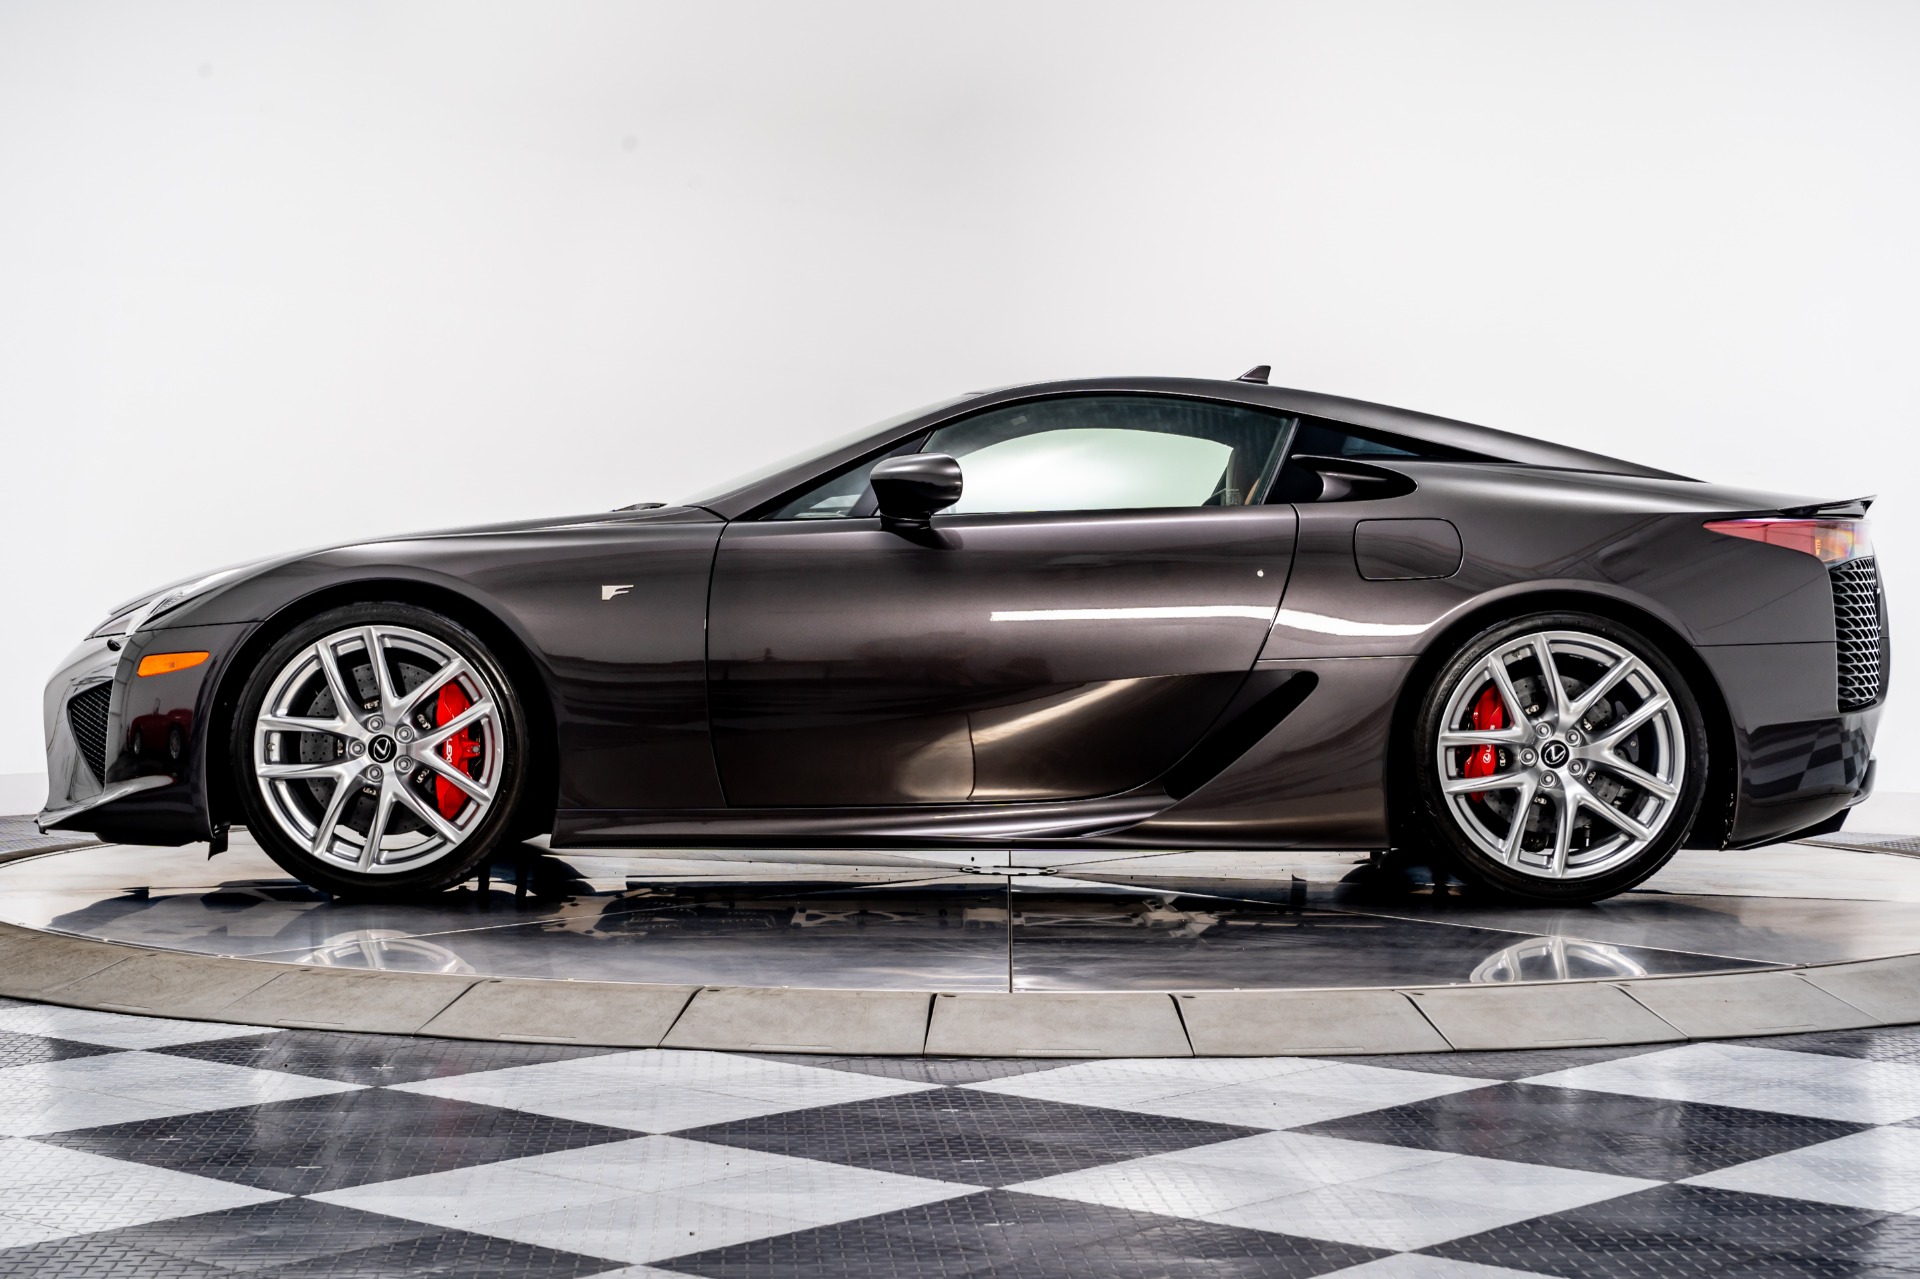 For Sale 12 Lexus Lfa With Only 500 Miles For Sale Supercars Net